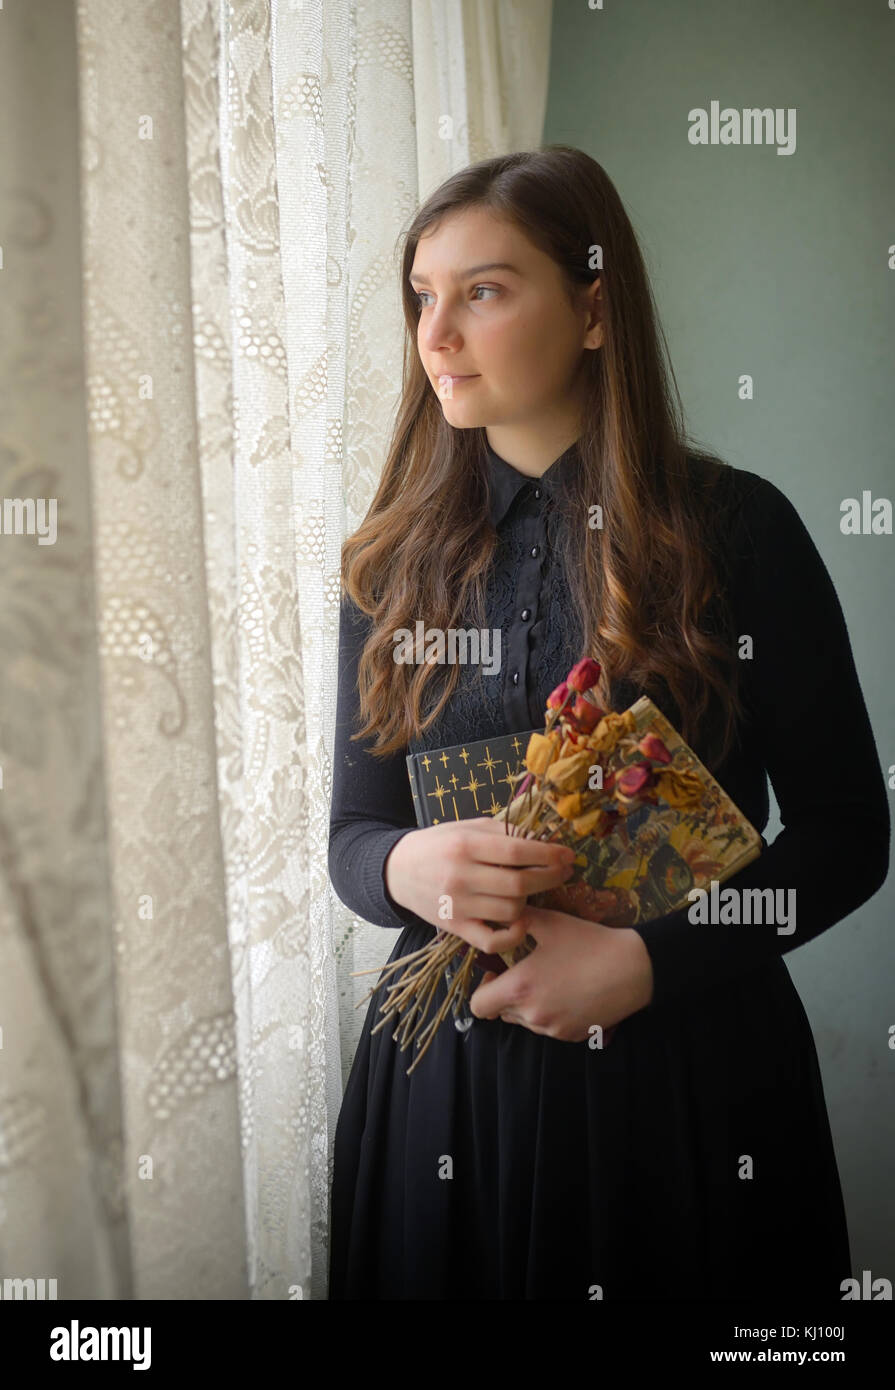 Young girl in black vintage dress standing near window Stock Photo